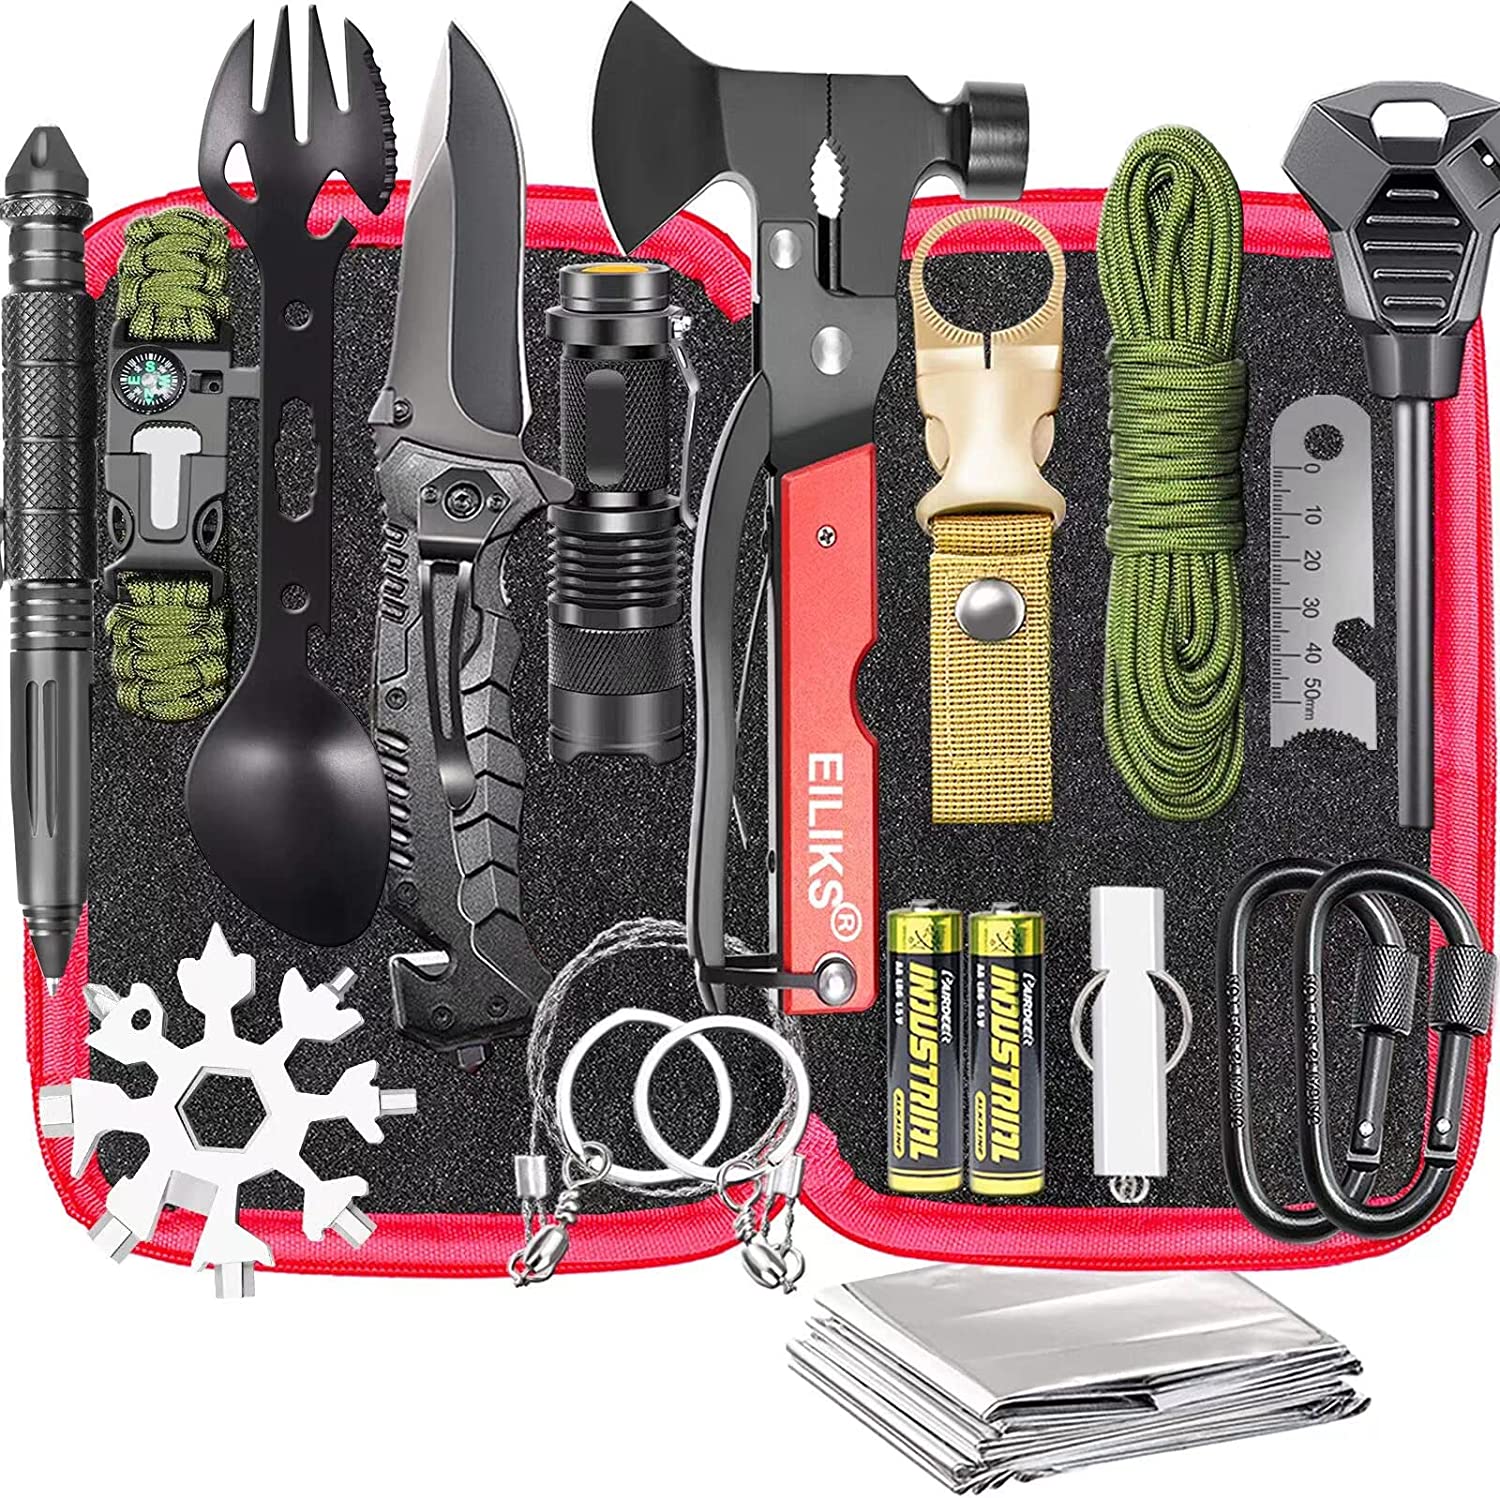 Gifts for Men Dad Husband, Survival Gear and Equipment Kit 20 in 1, Emergency Escape Tool with Axe, Christmas Stocking Stuffers, Cool Gadget Birthday Ideas for Him Boy Camping Hiking Fishing Hunting